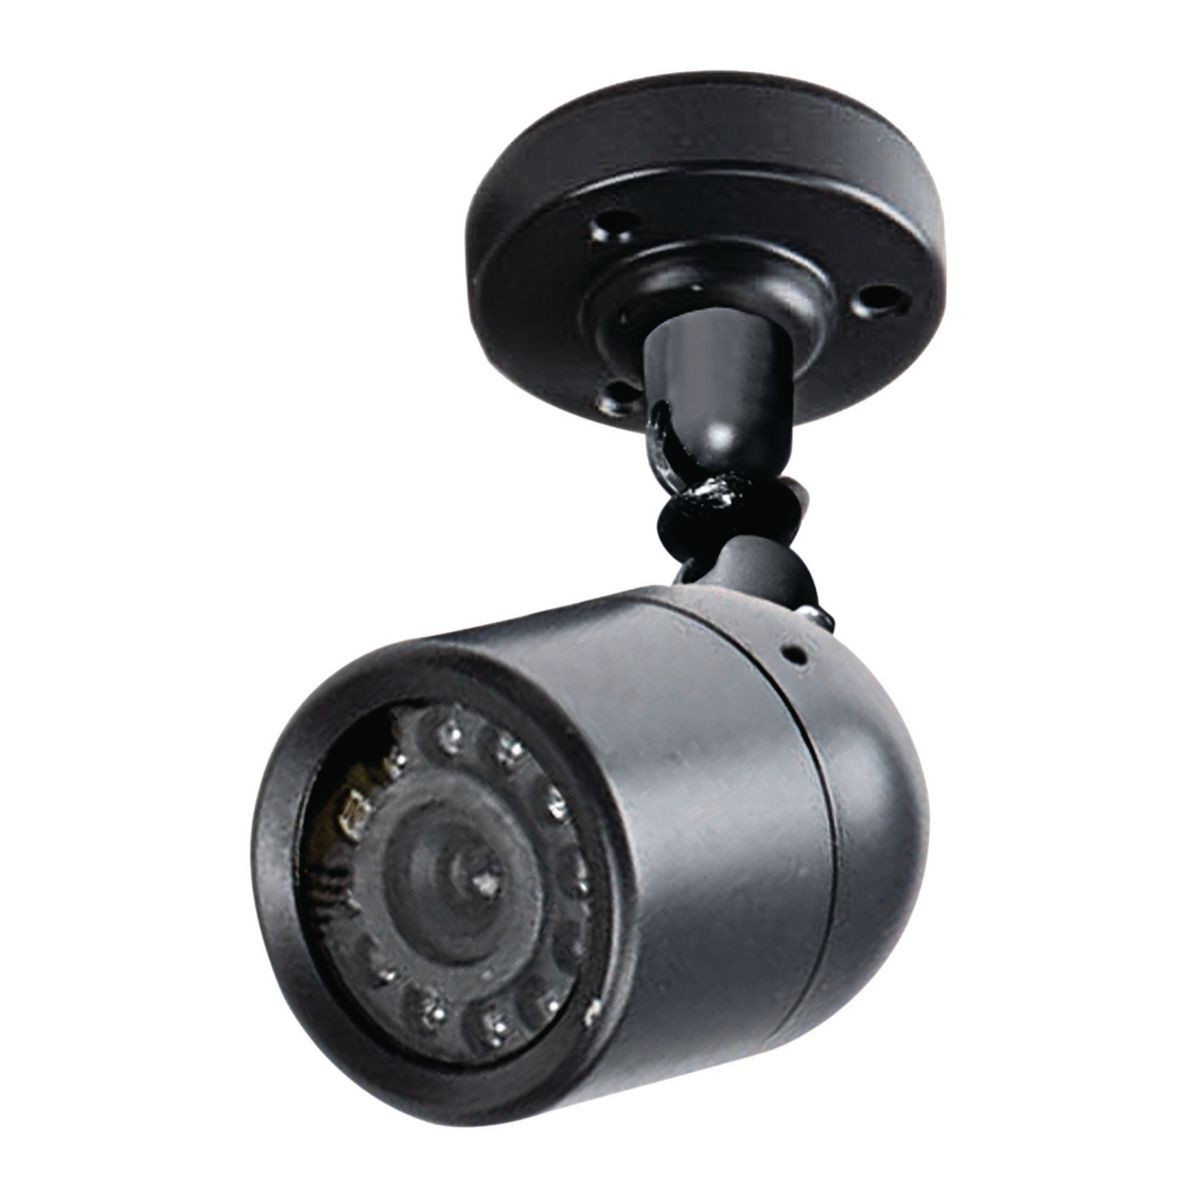 bunker hill security wireless color security camera